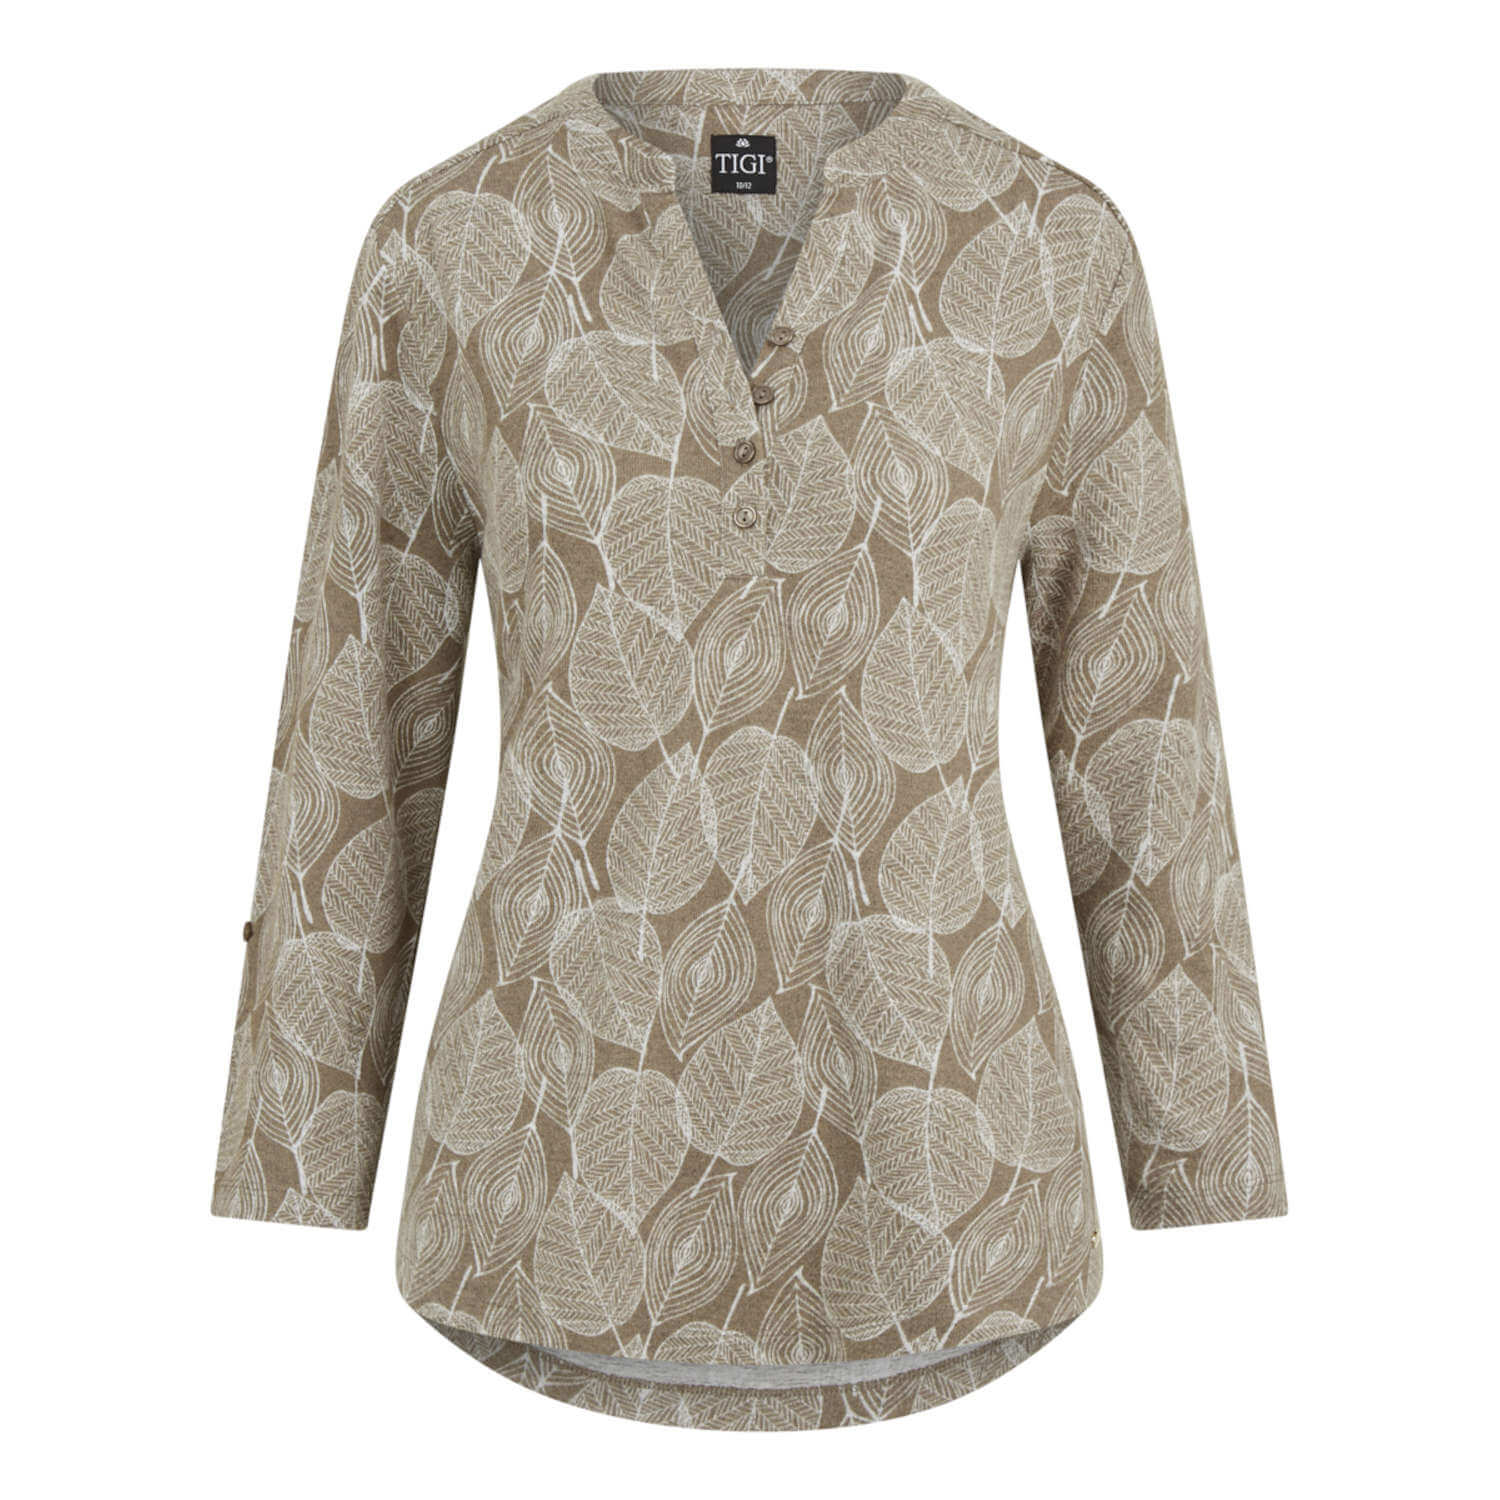 Tigiwear Stencil Leaf Print Top - Taupe 6 Shaws Department Stores